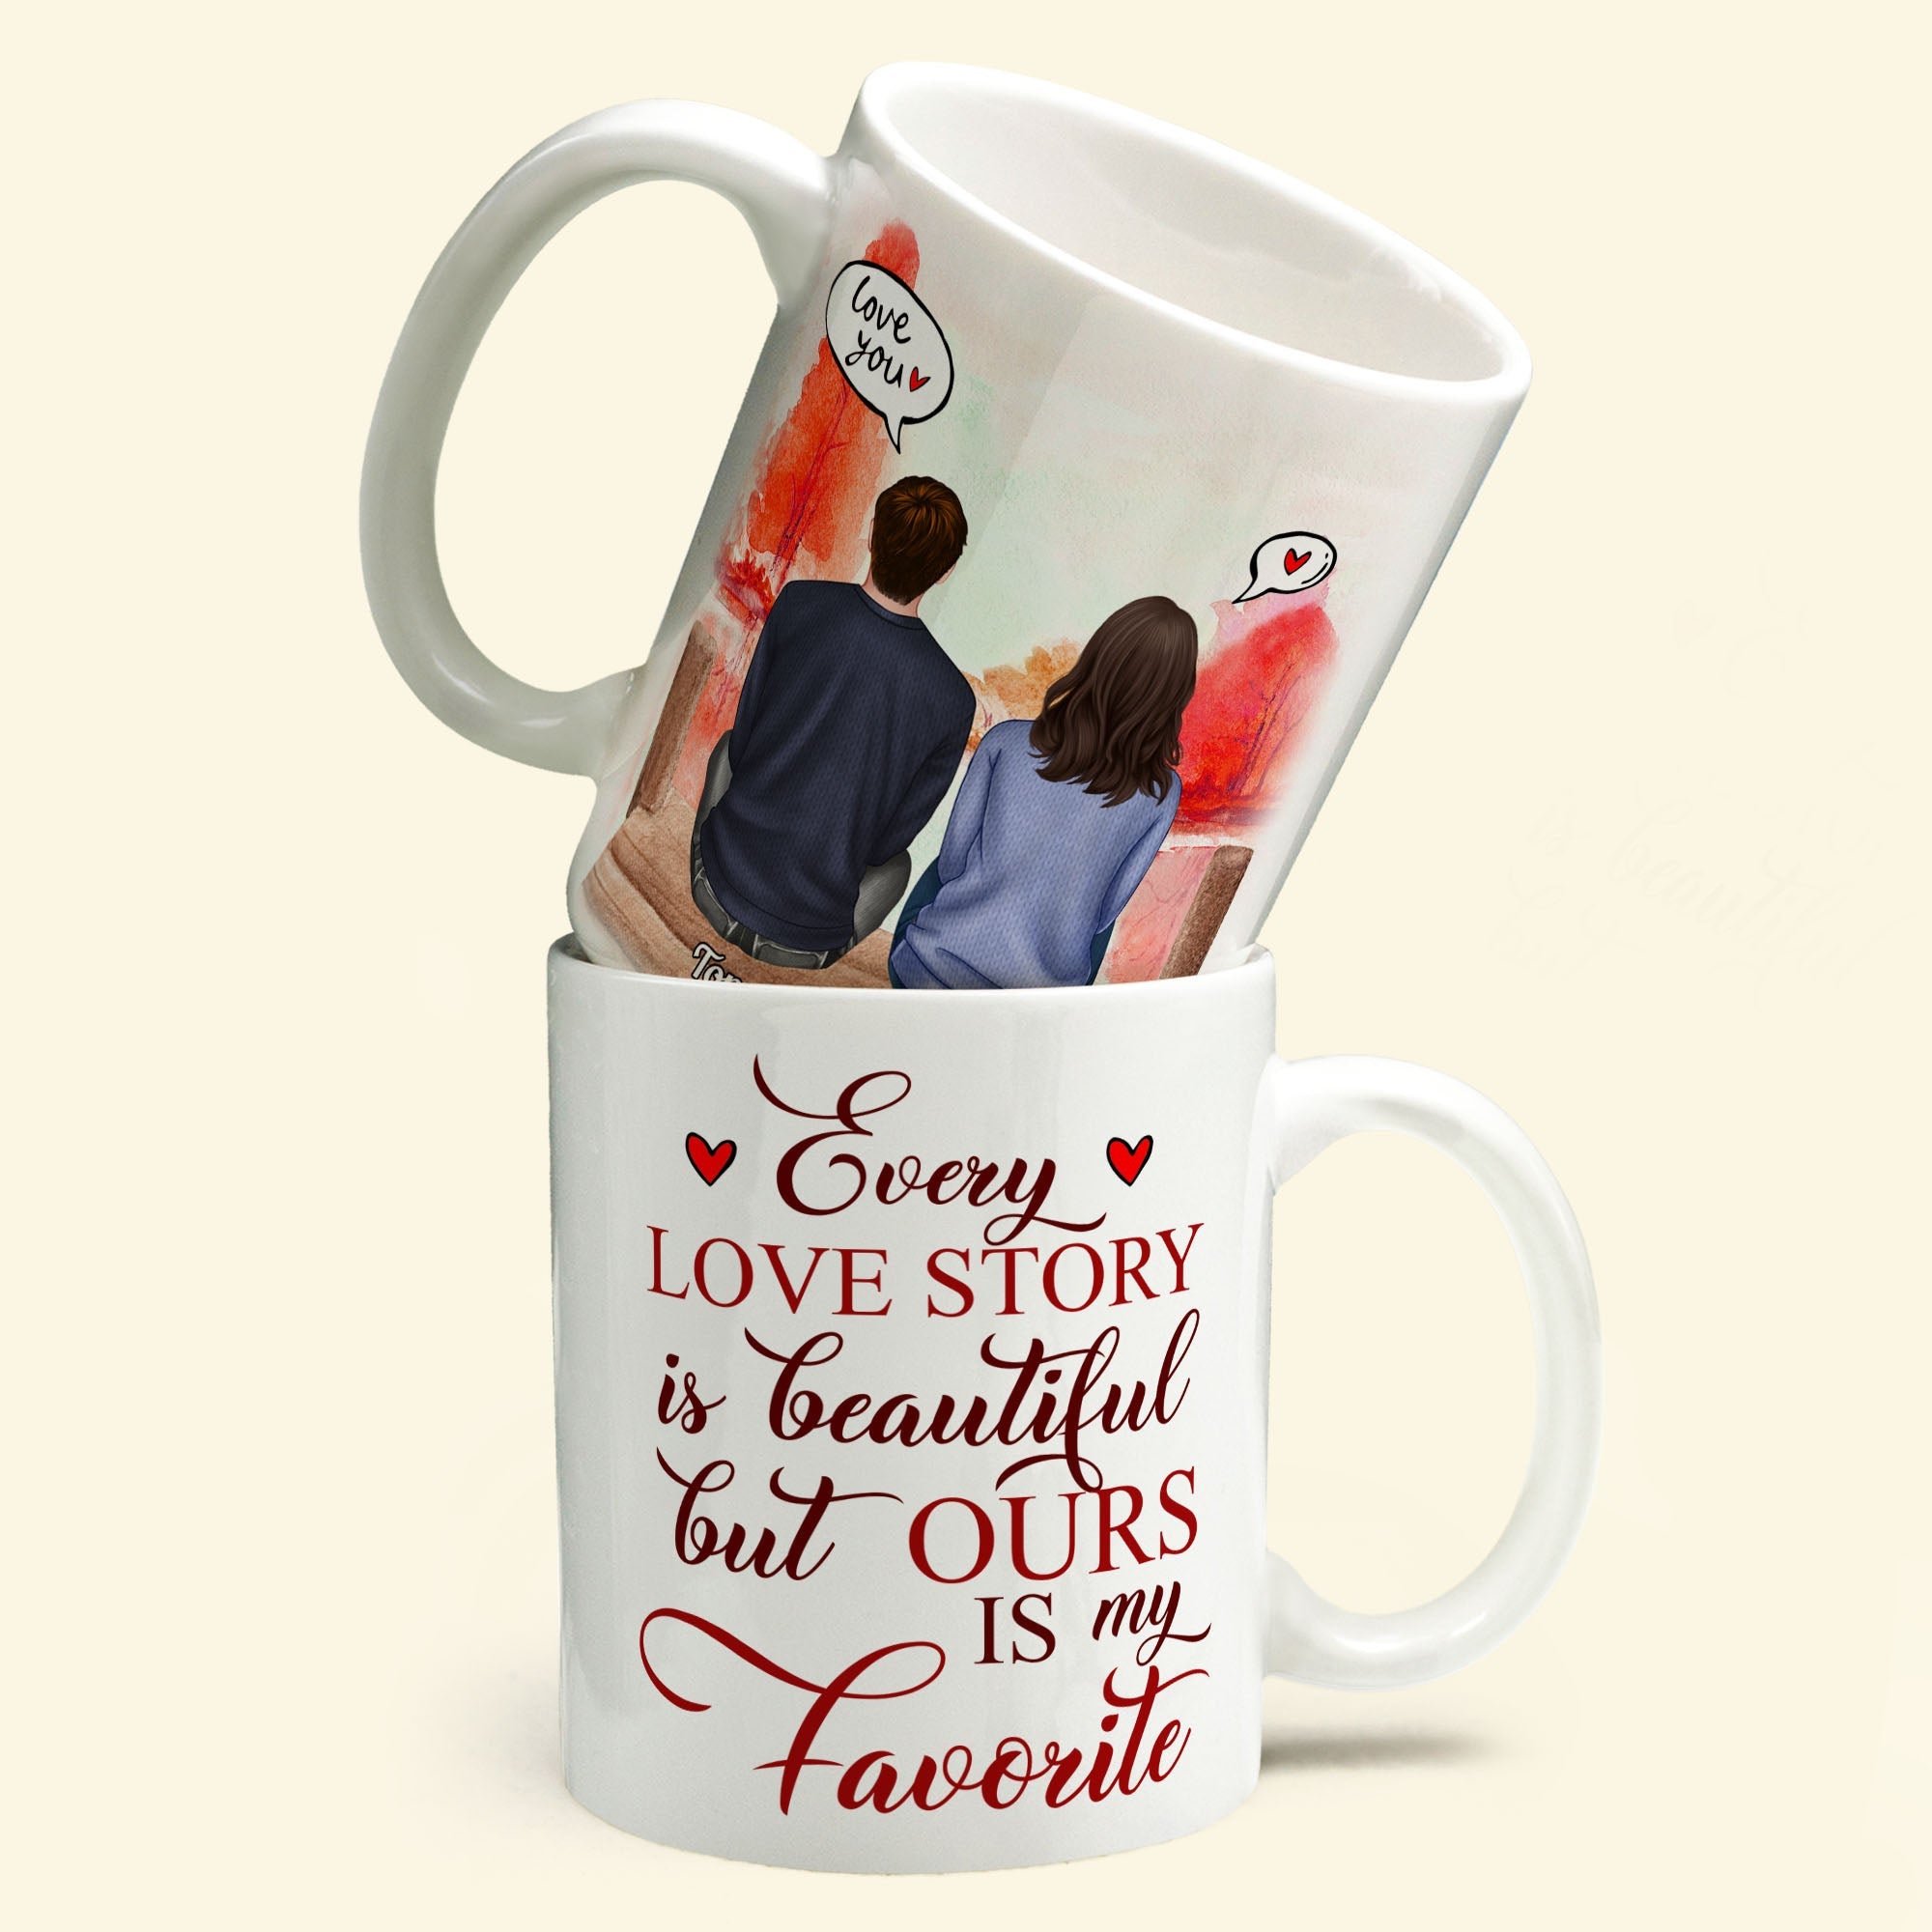 My Favourite Love Story Is Ours - Personalized Mug - Anniversary, Valentine's Day Gift For Spouse, Partner, Couple